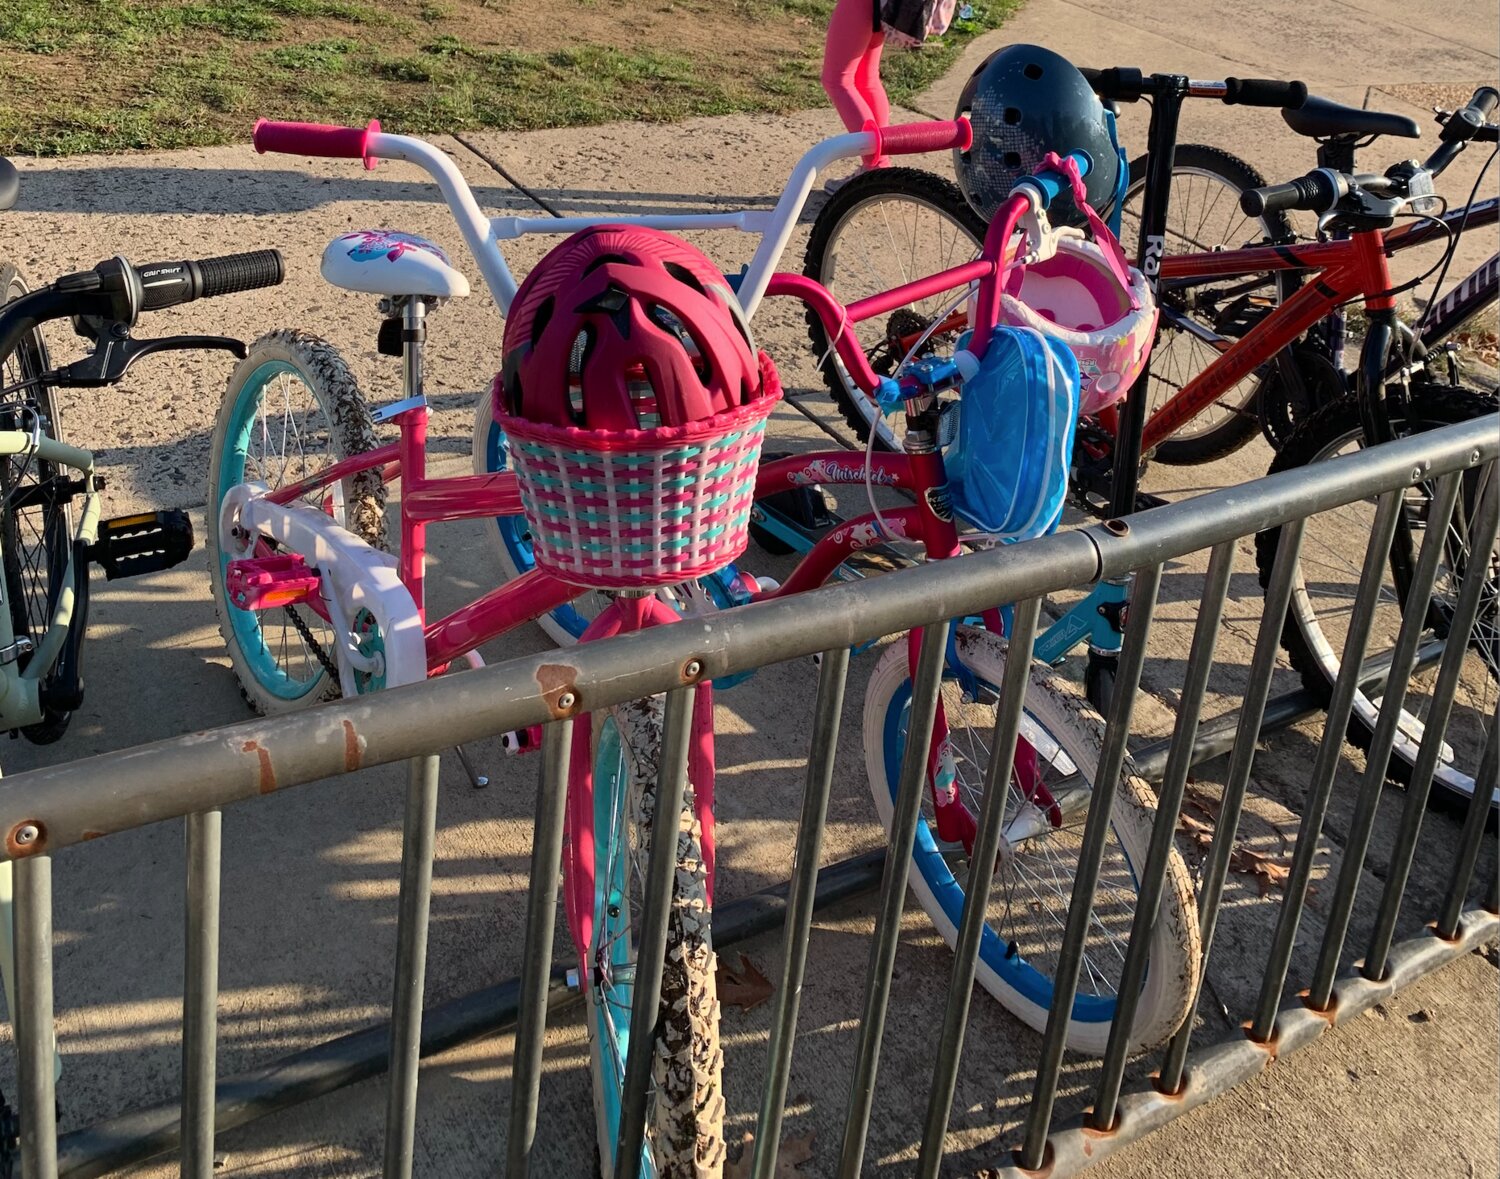 While many students bike to school every day, Walk to School Day encouraged car and bus riders to try biking to school for a day.